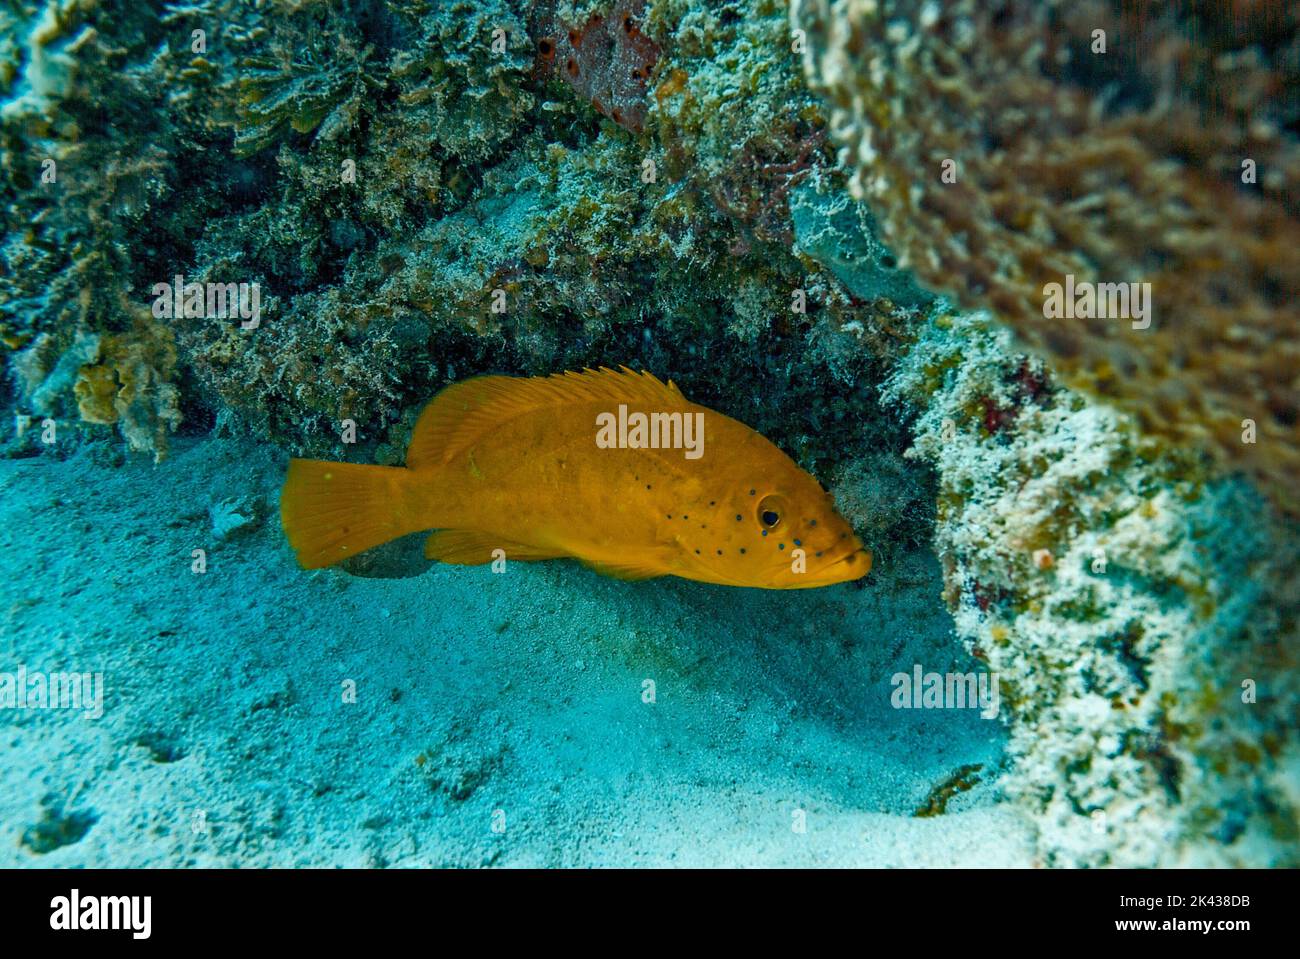 Coney fish on the Reef Stock Photo